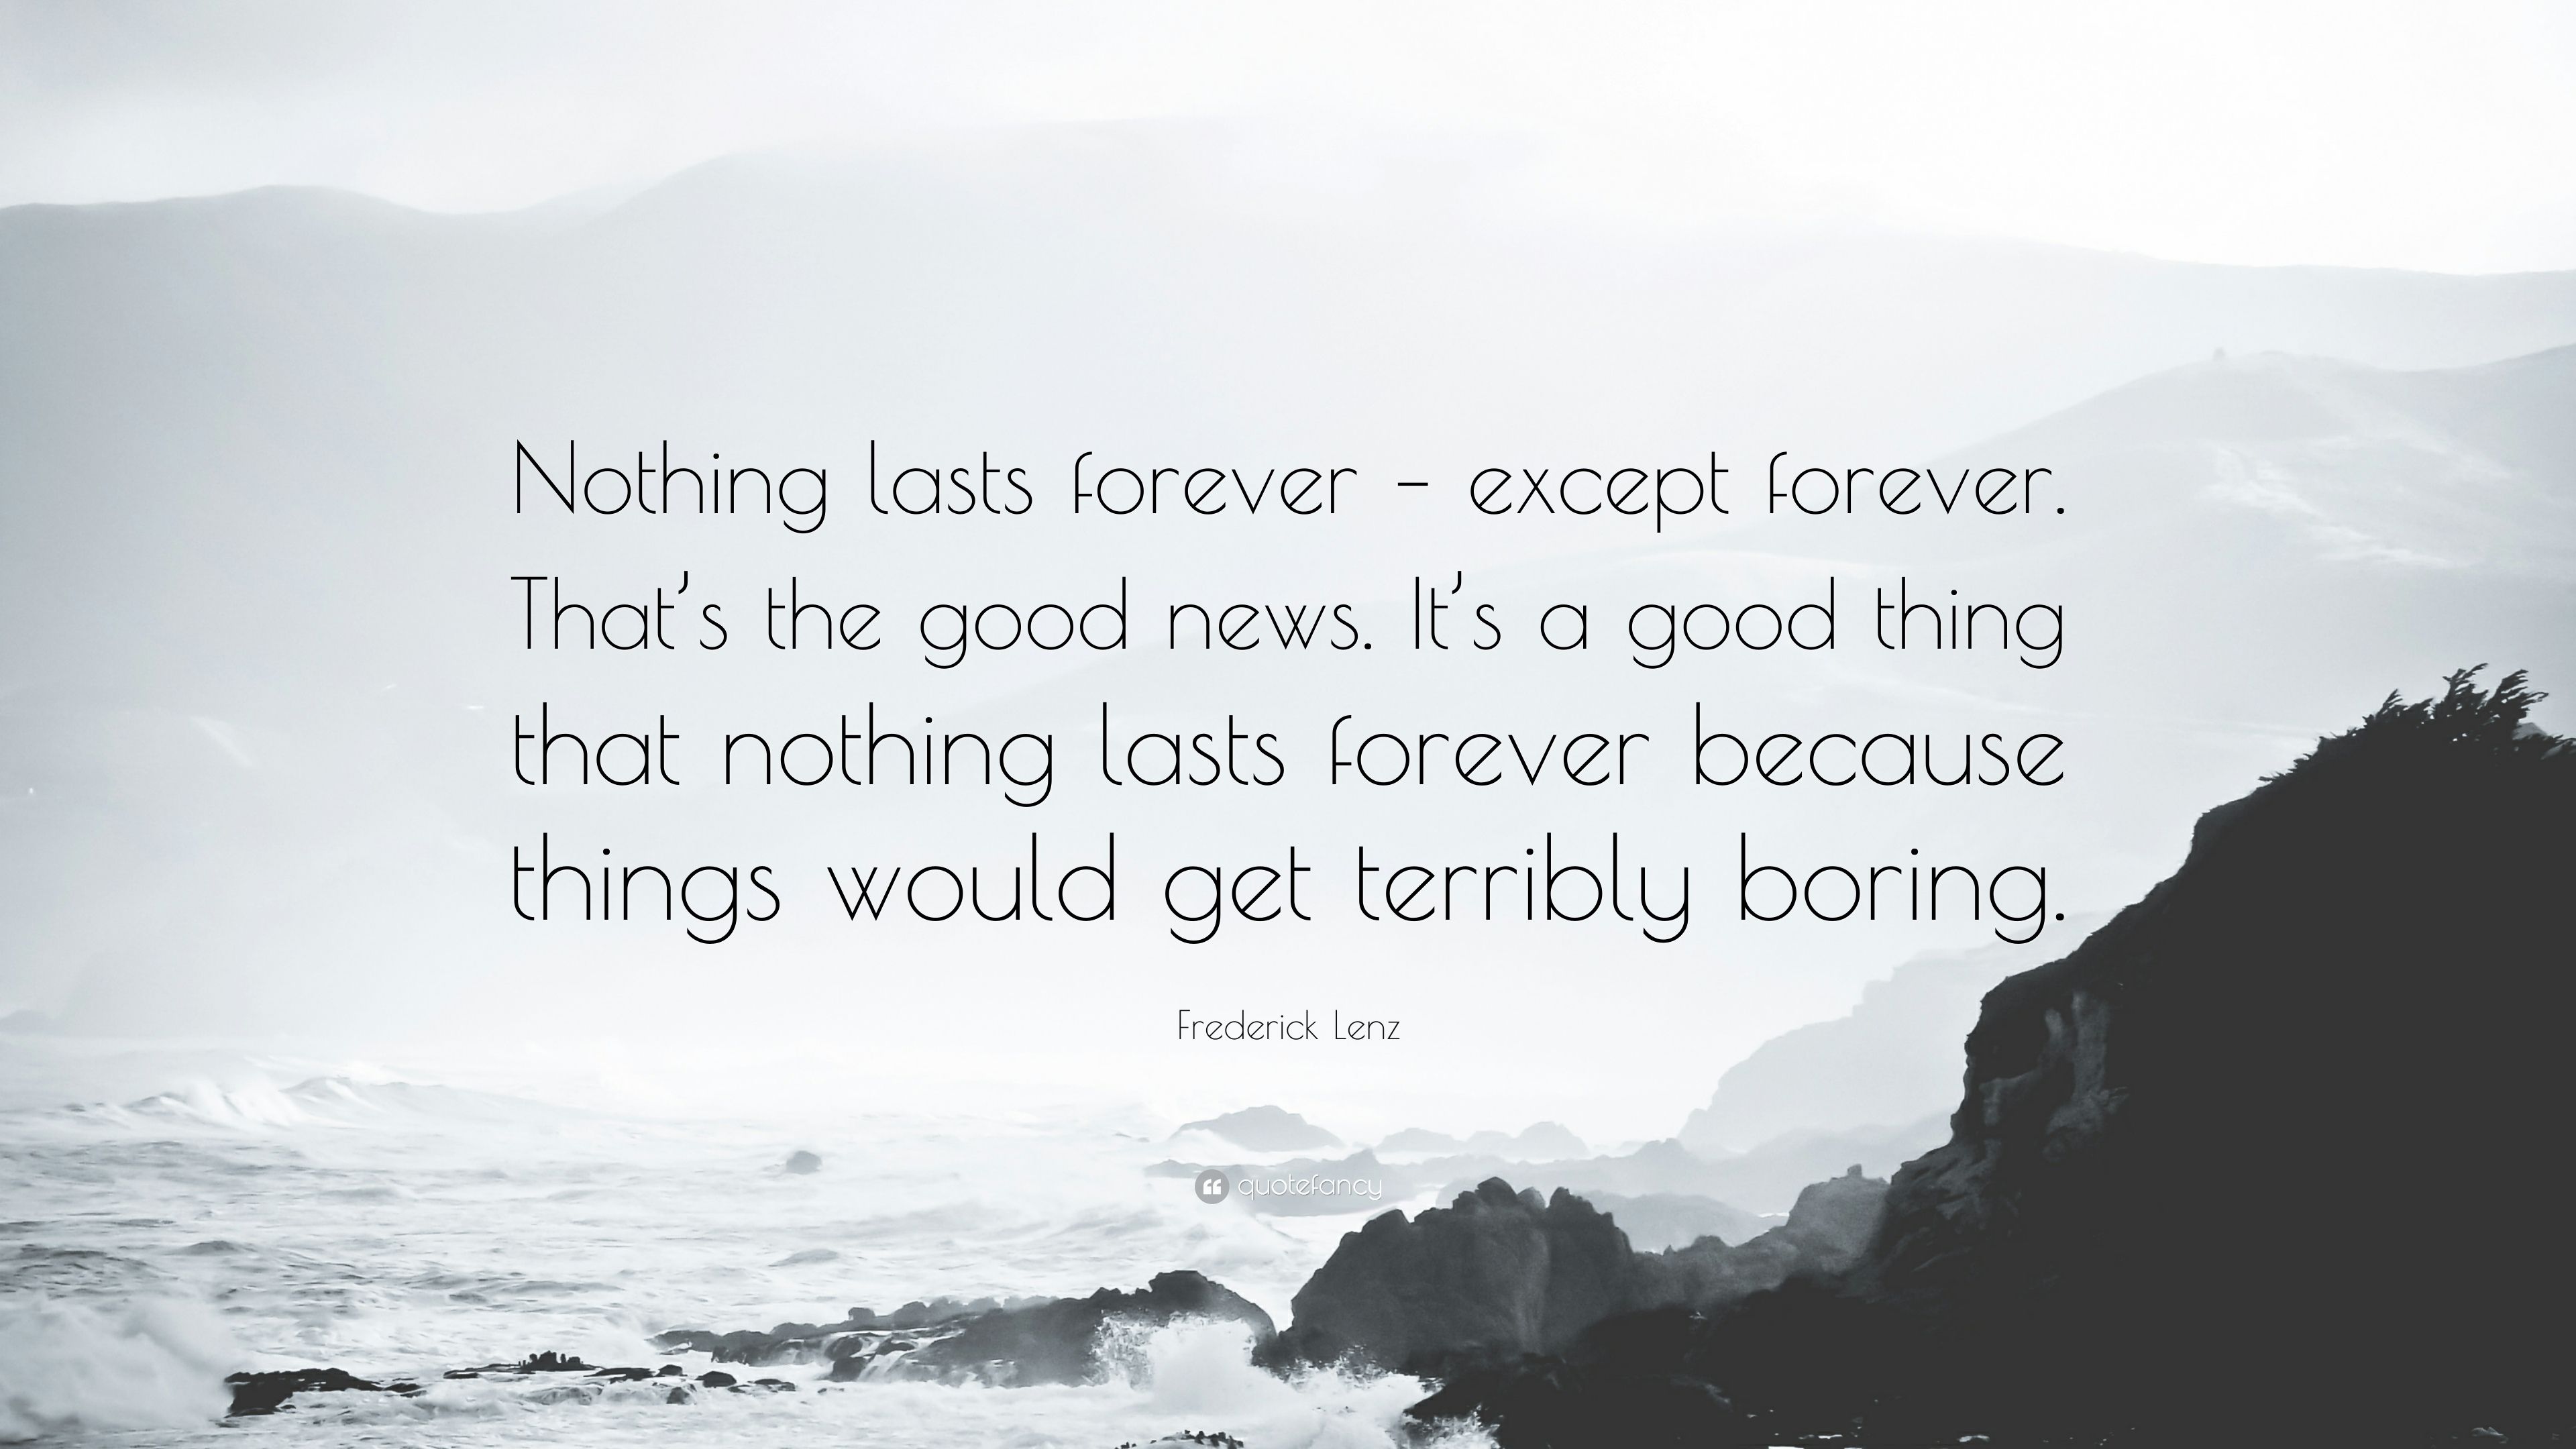 Frederick Lenz Quote: “Nothing lasts forever